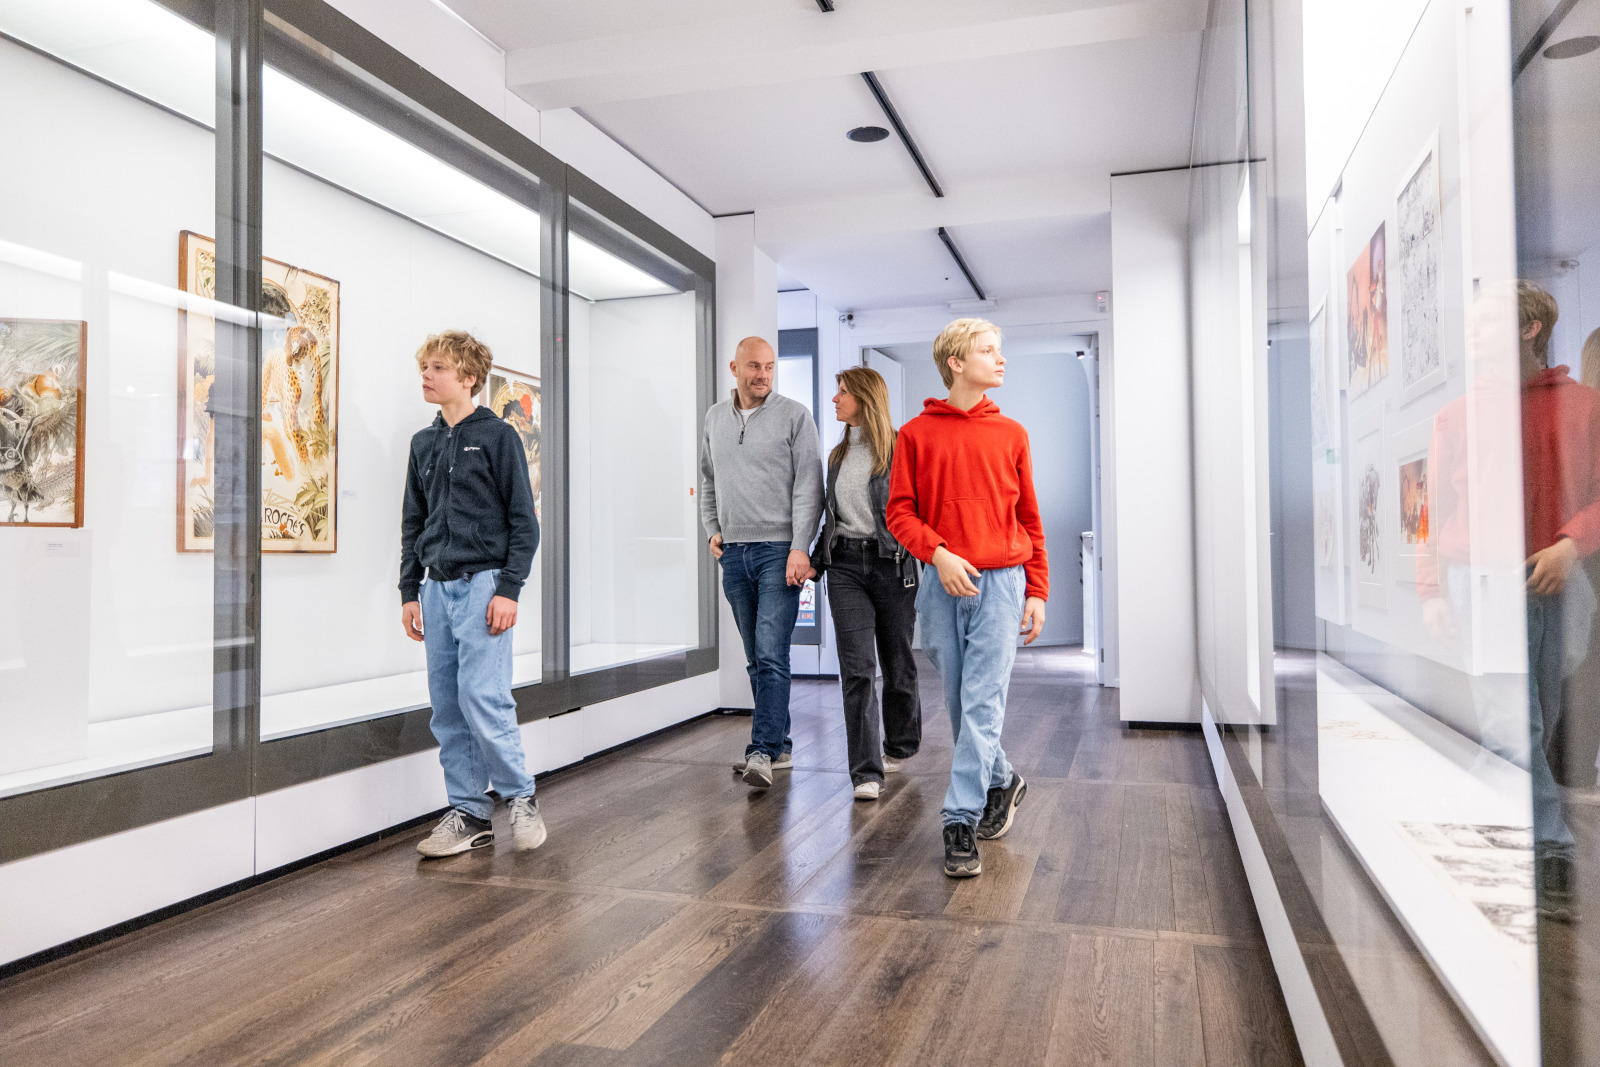 A family looks at works at the Grand Curtius museum in Liège